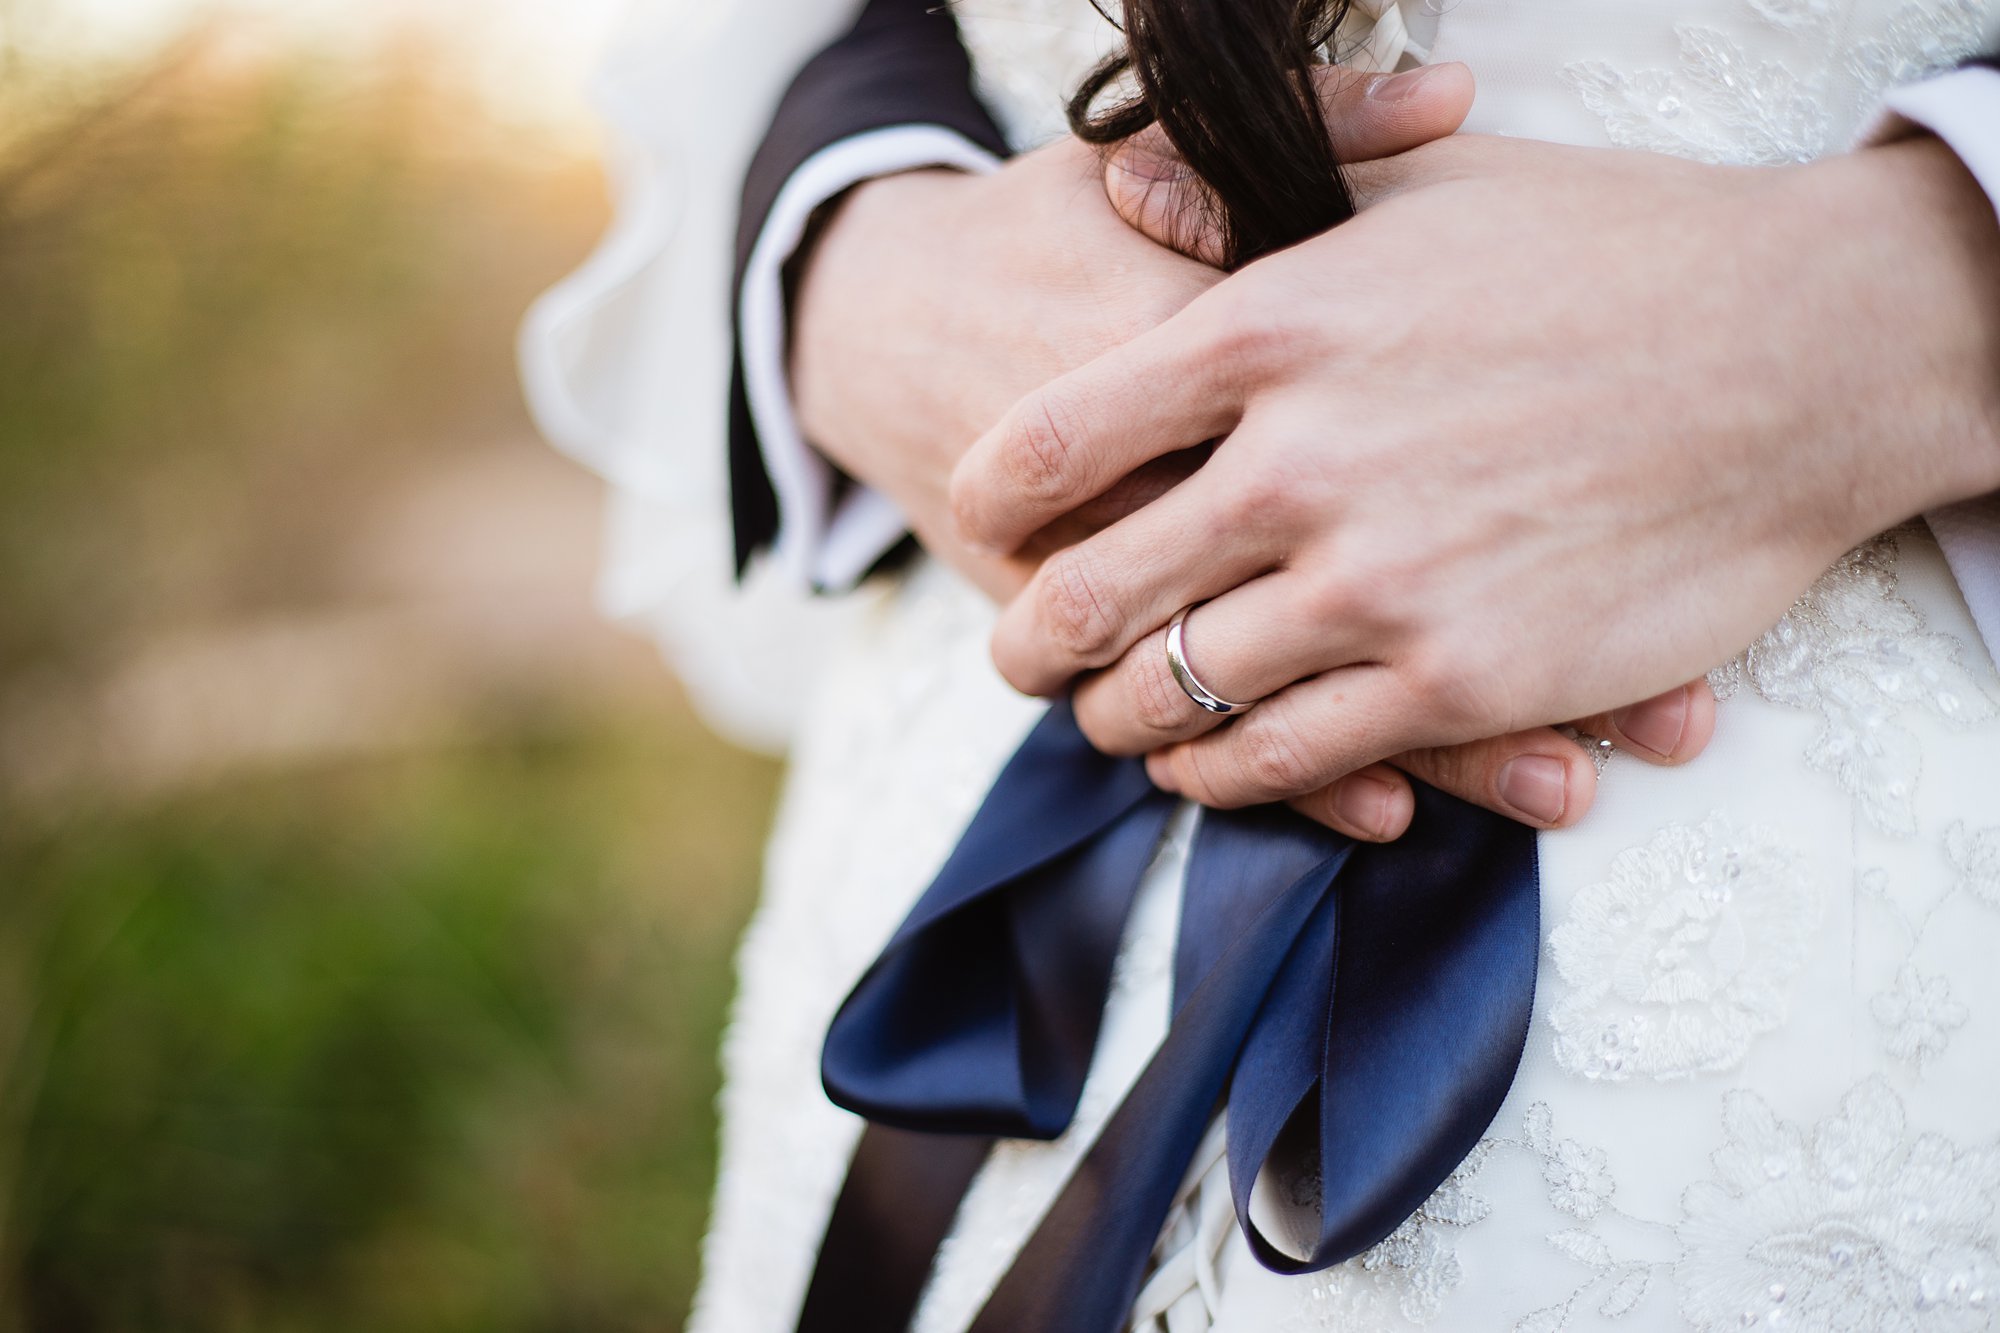 Detail image of groom's wedding ring as he wraps his arms around the bride by PMA Photography.